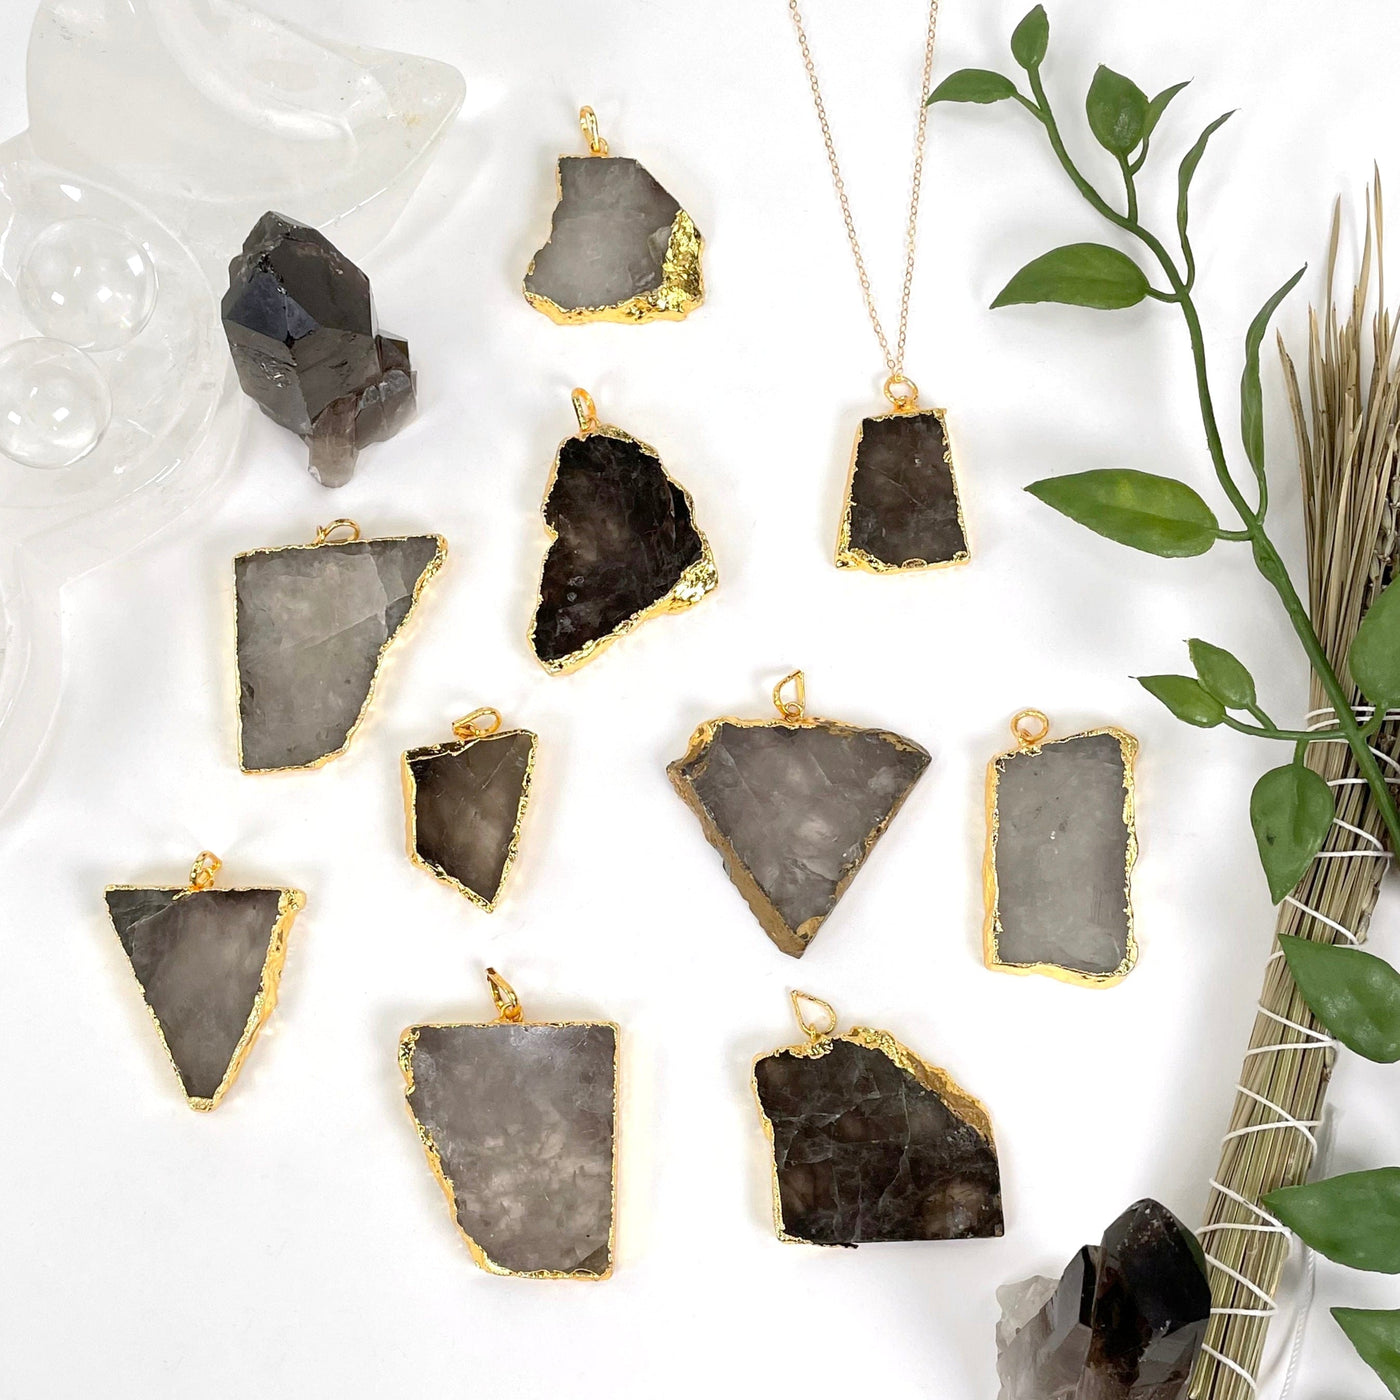 overhead view of many smokey quartz slab pendants on white background with decorations for possible variations